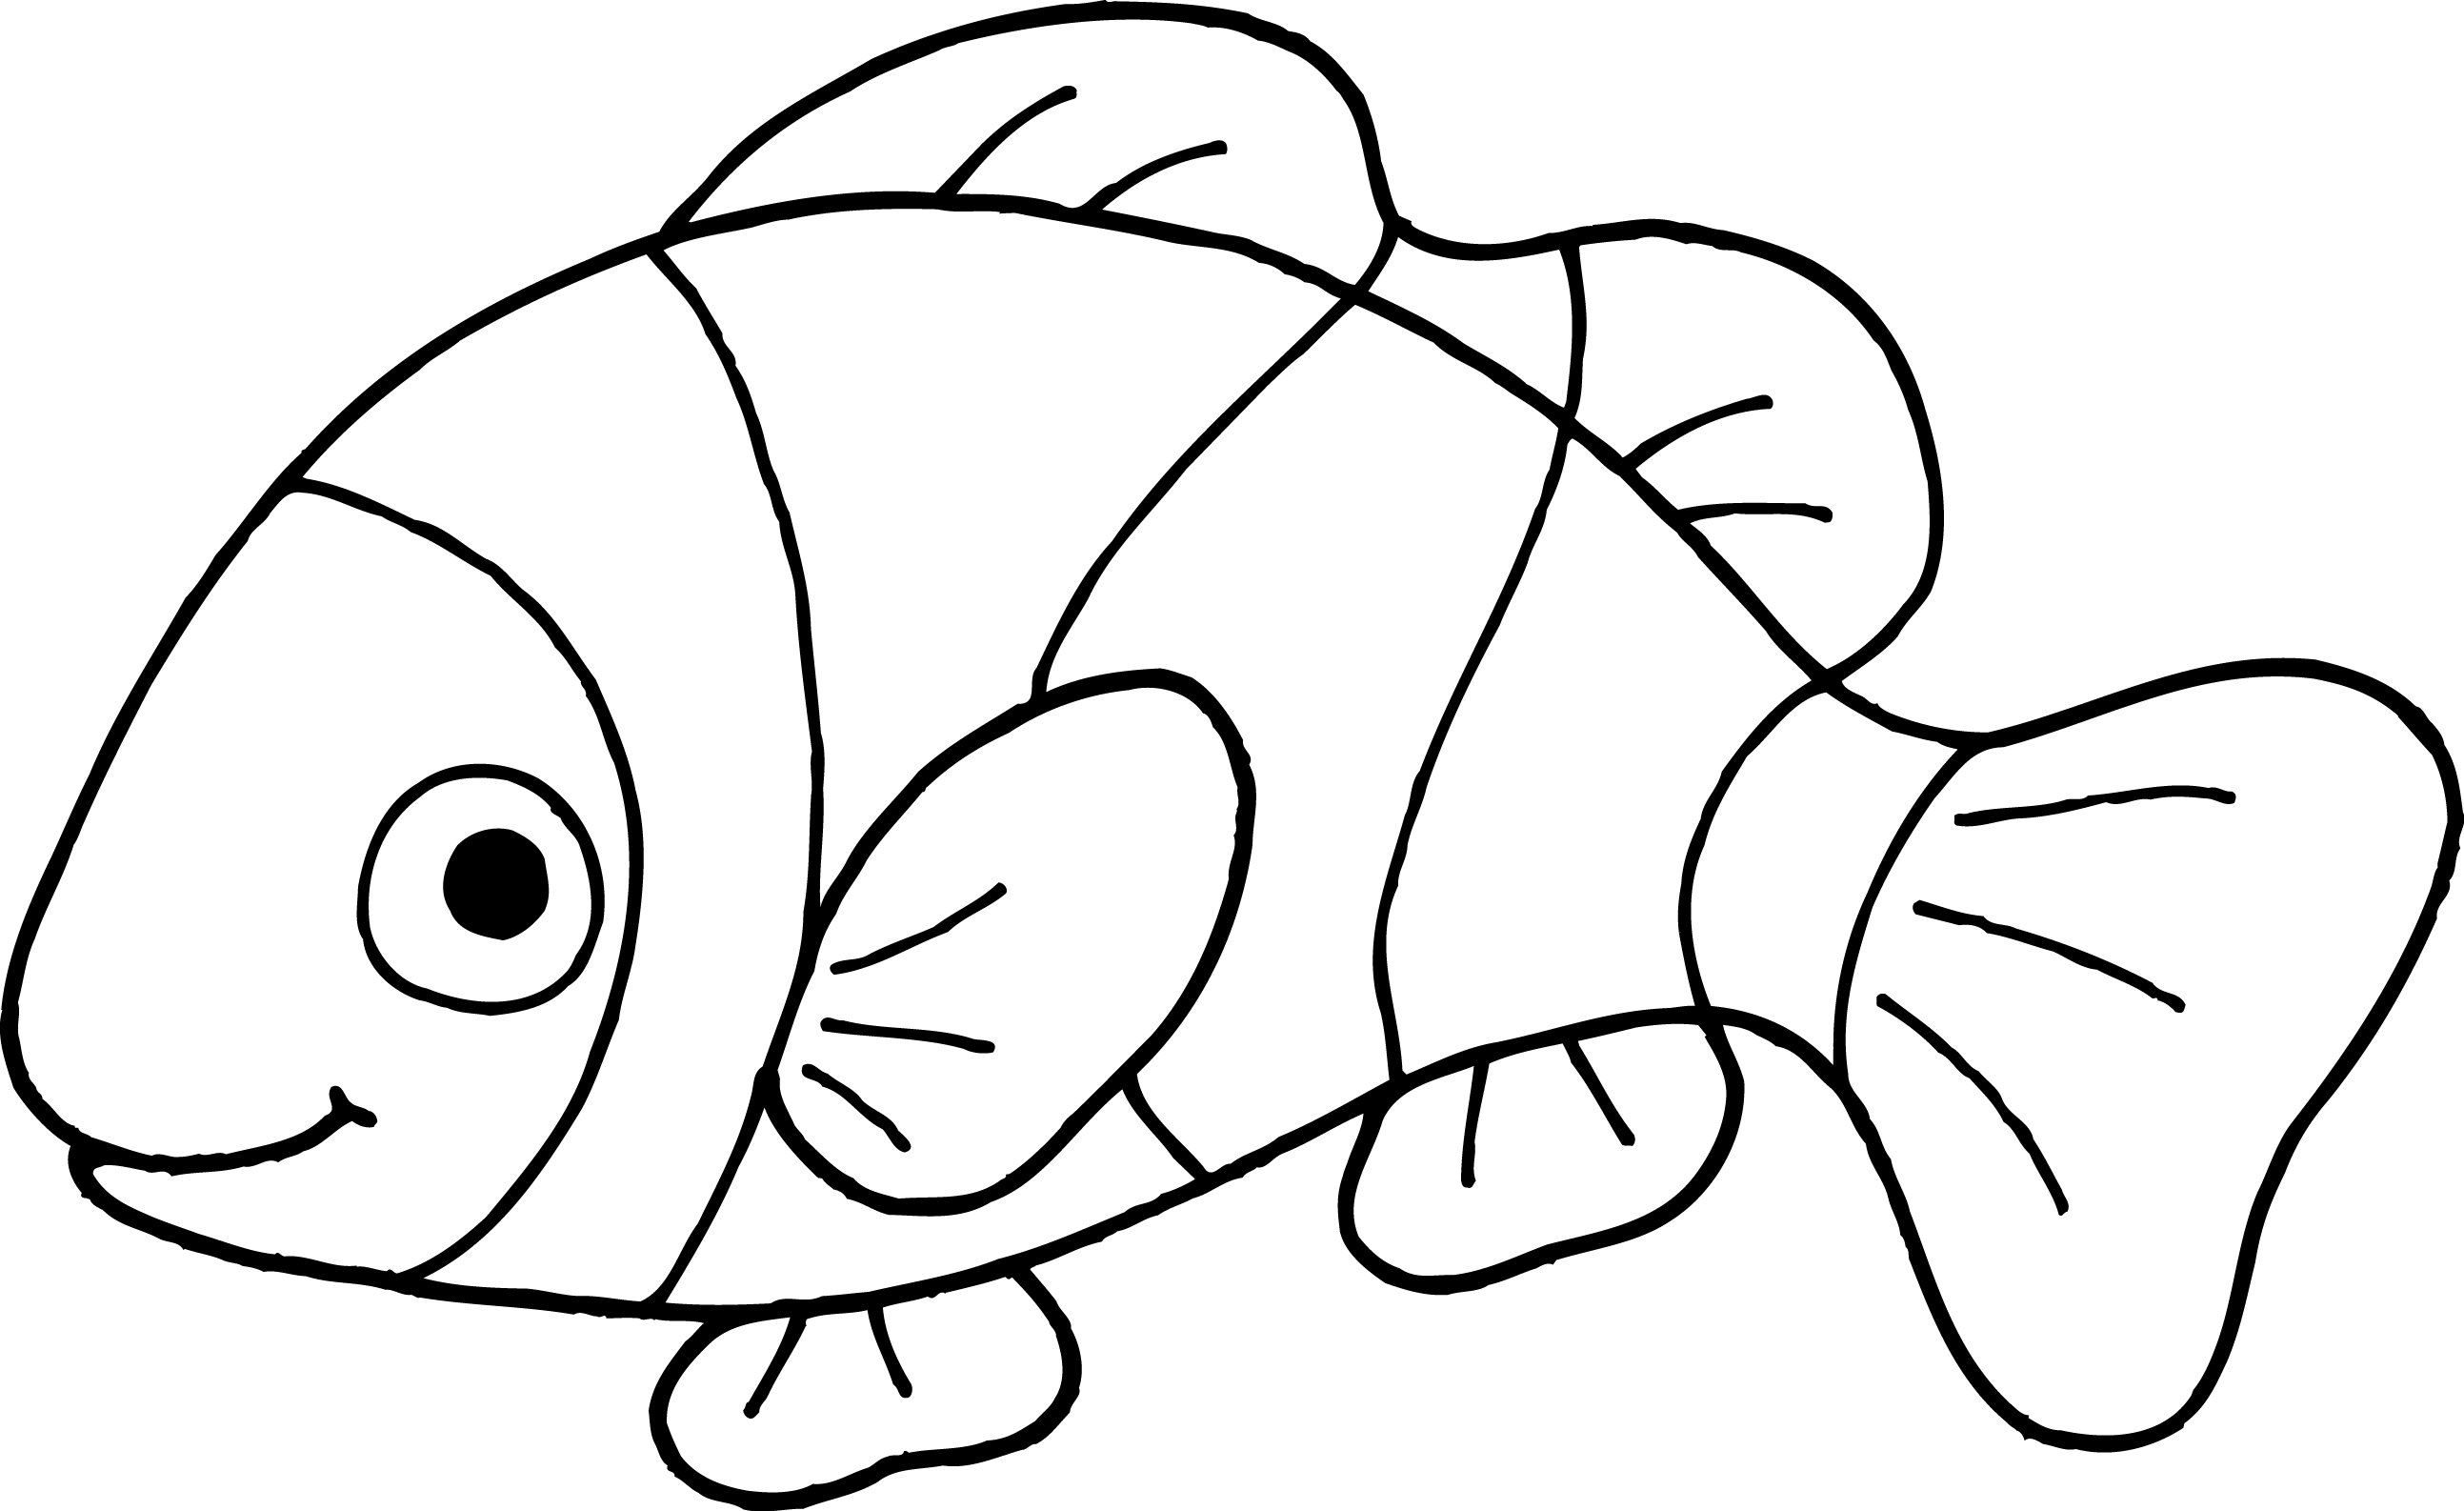 Pet Fishes in Bowl Coloring Page - Free Clip Art